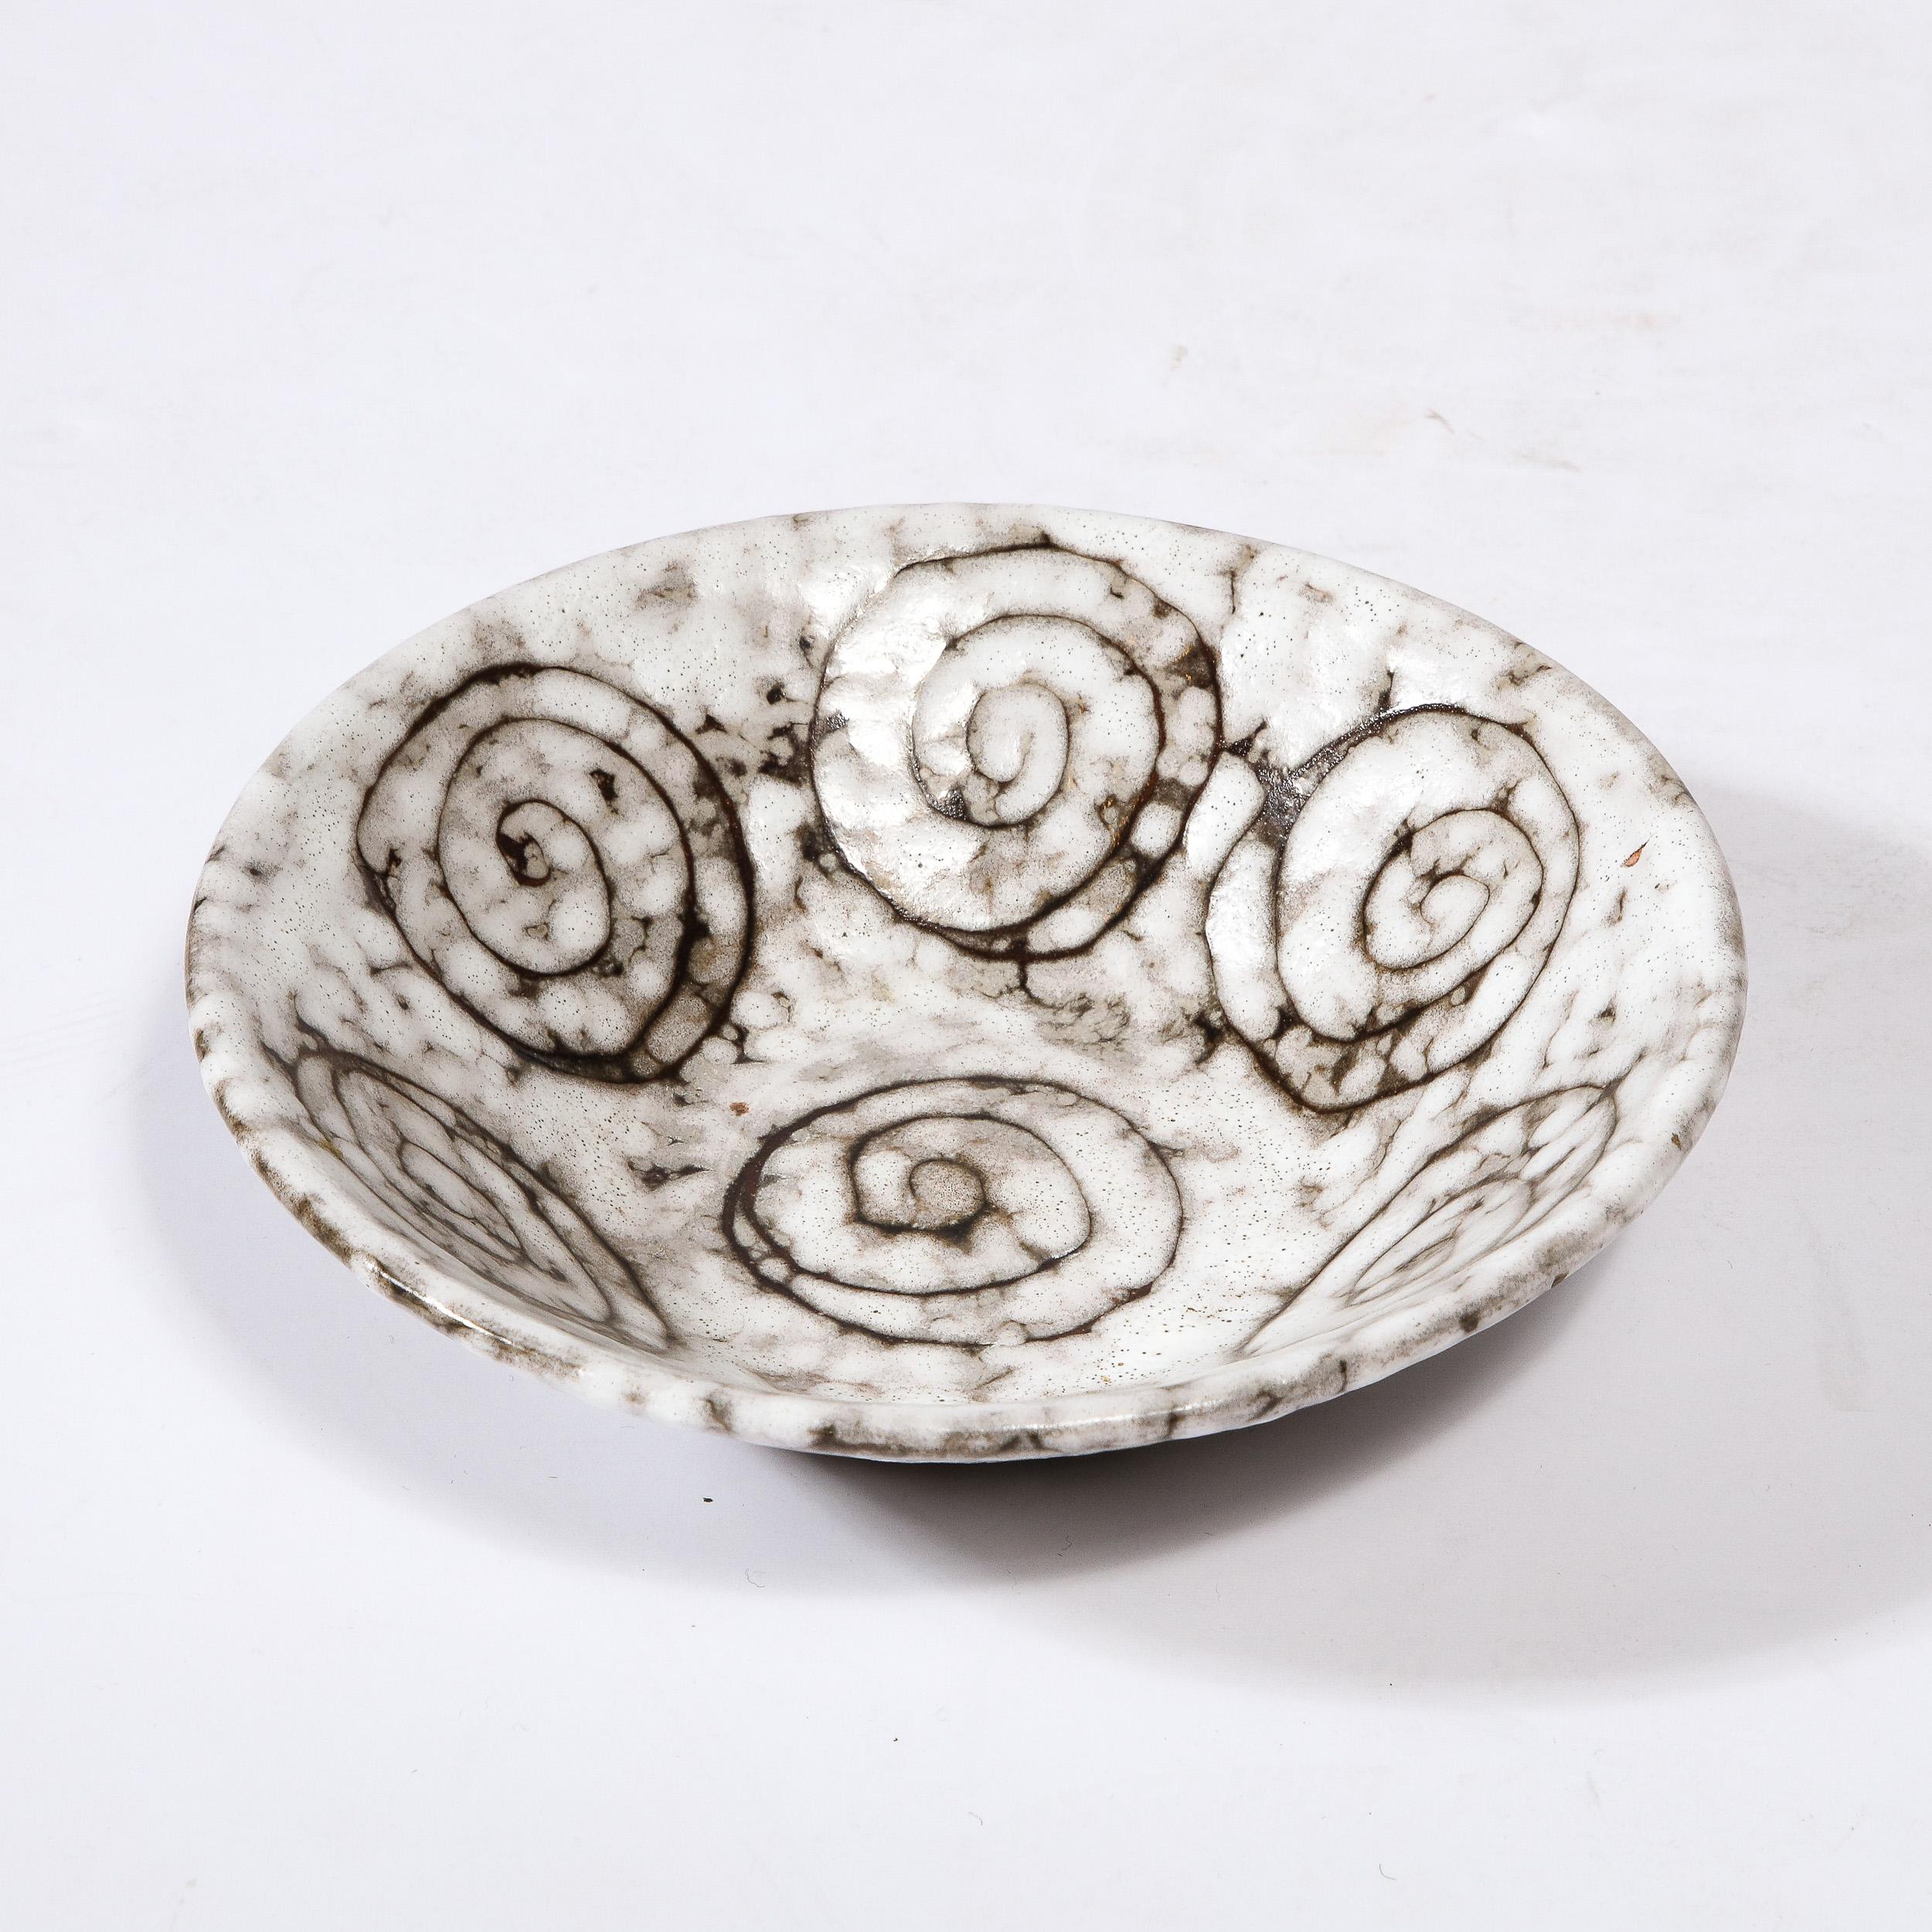 Mid-20th Century Mid-Century Modernist White and Earth Toned Ceramic Dish W/ Seven Spirals